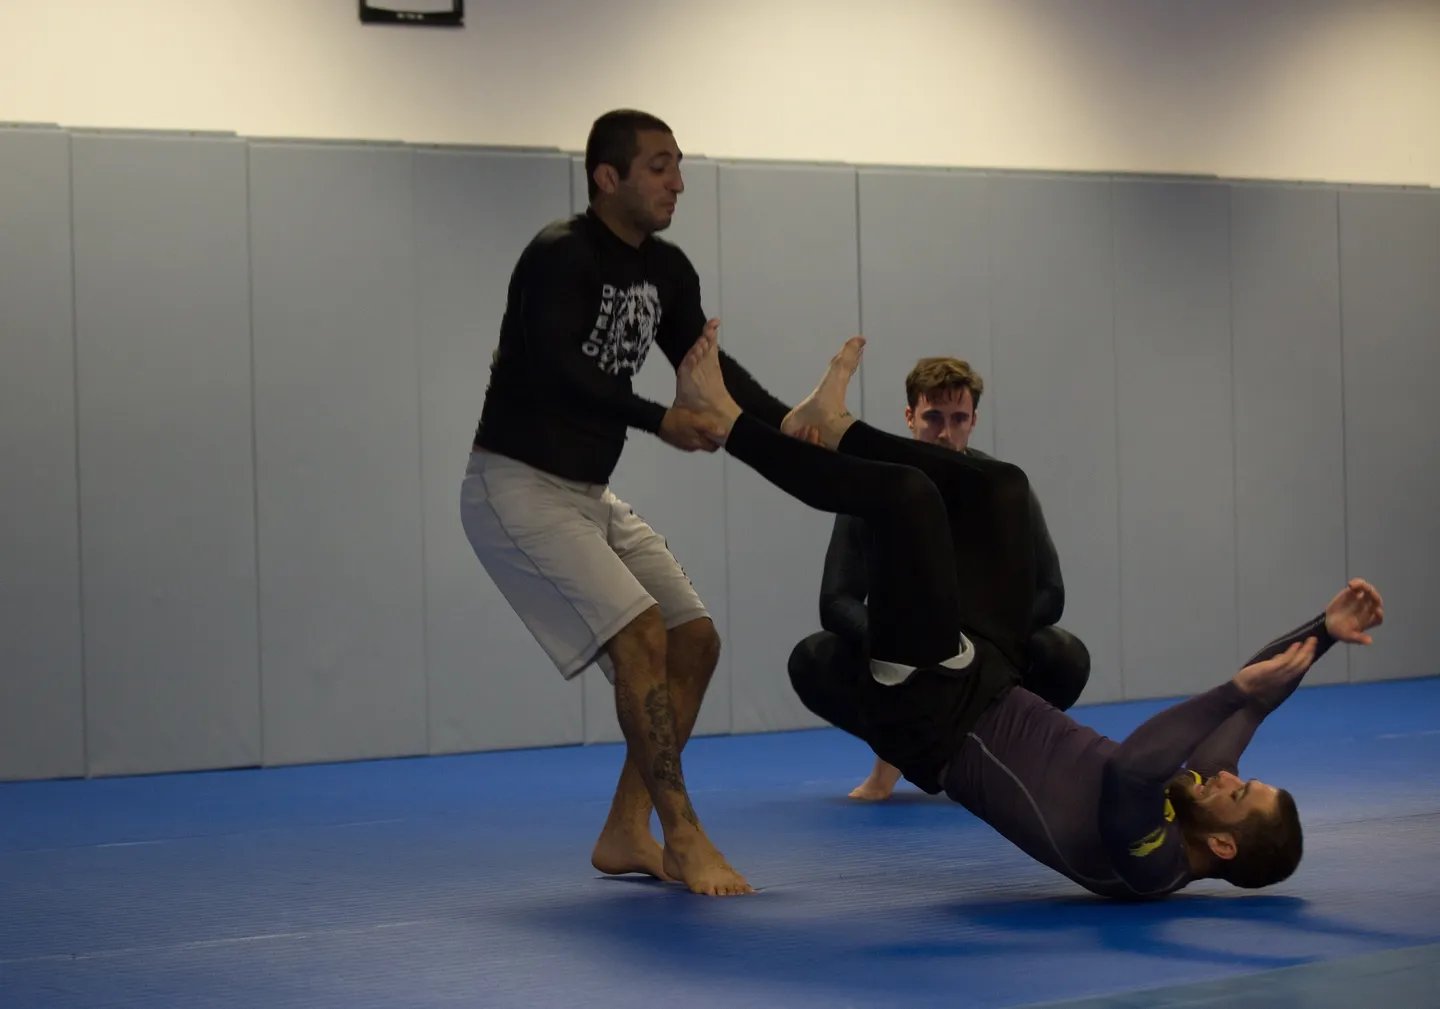 Two men are practicing martial arts on a blue floor.